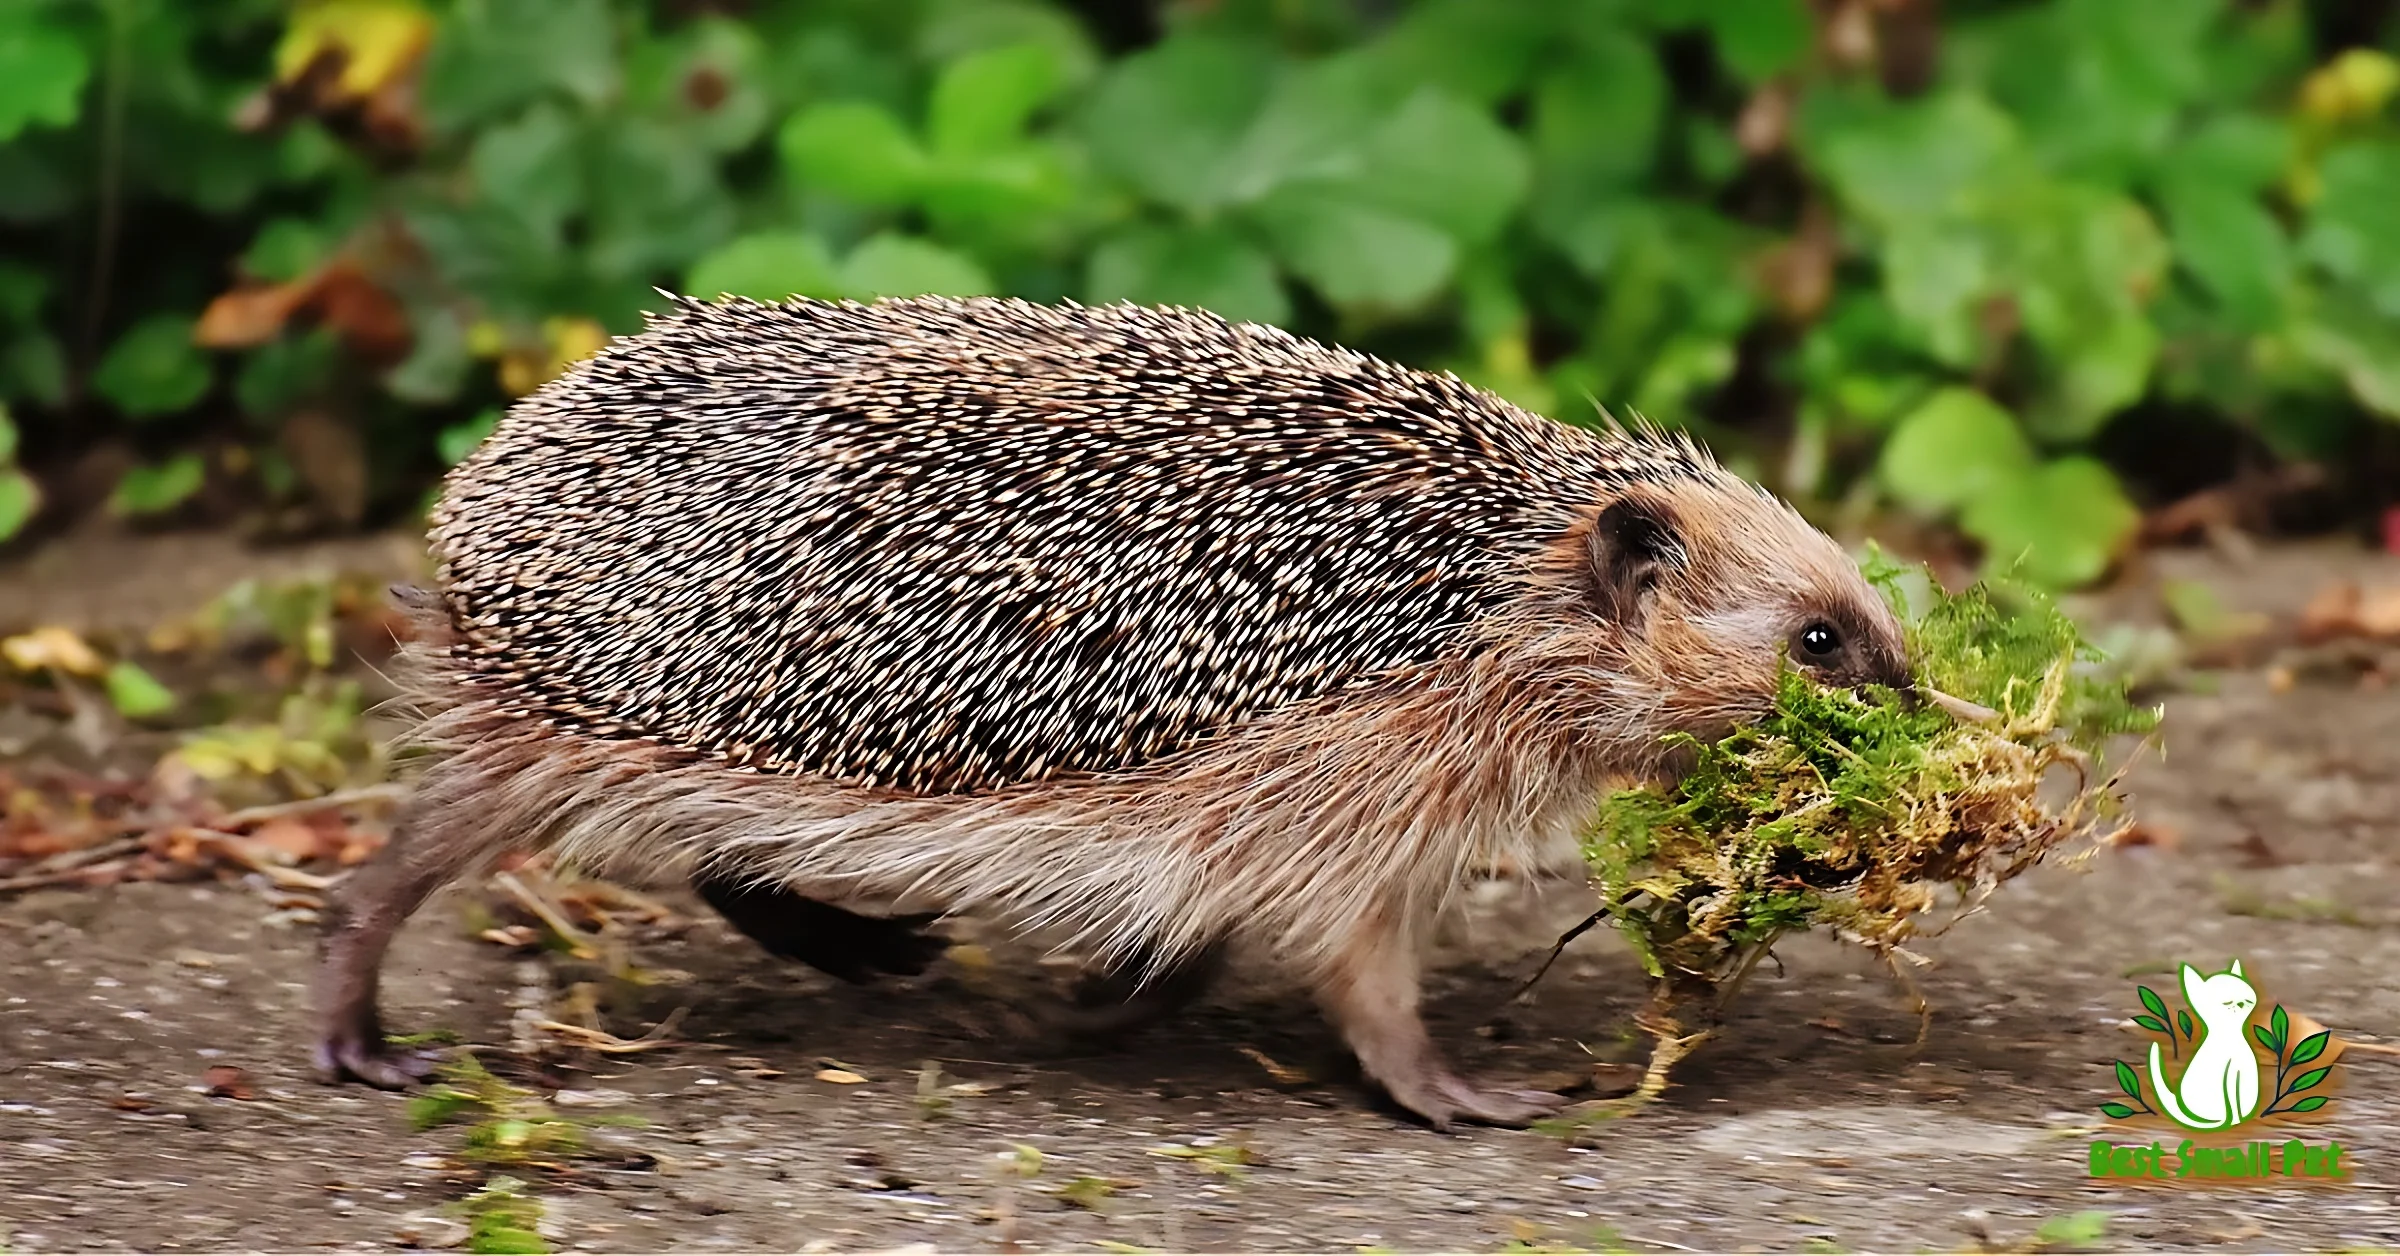 How Long Do Hedgehogs Live in jungle